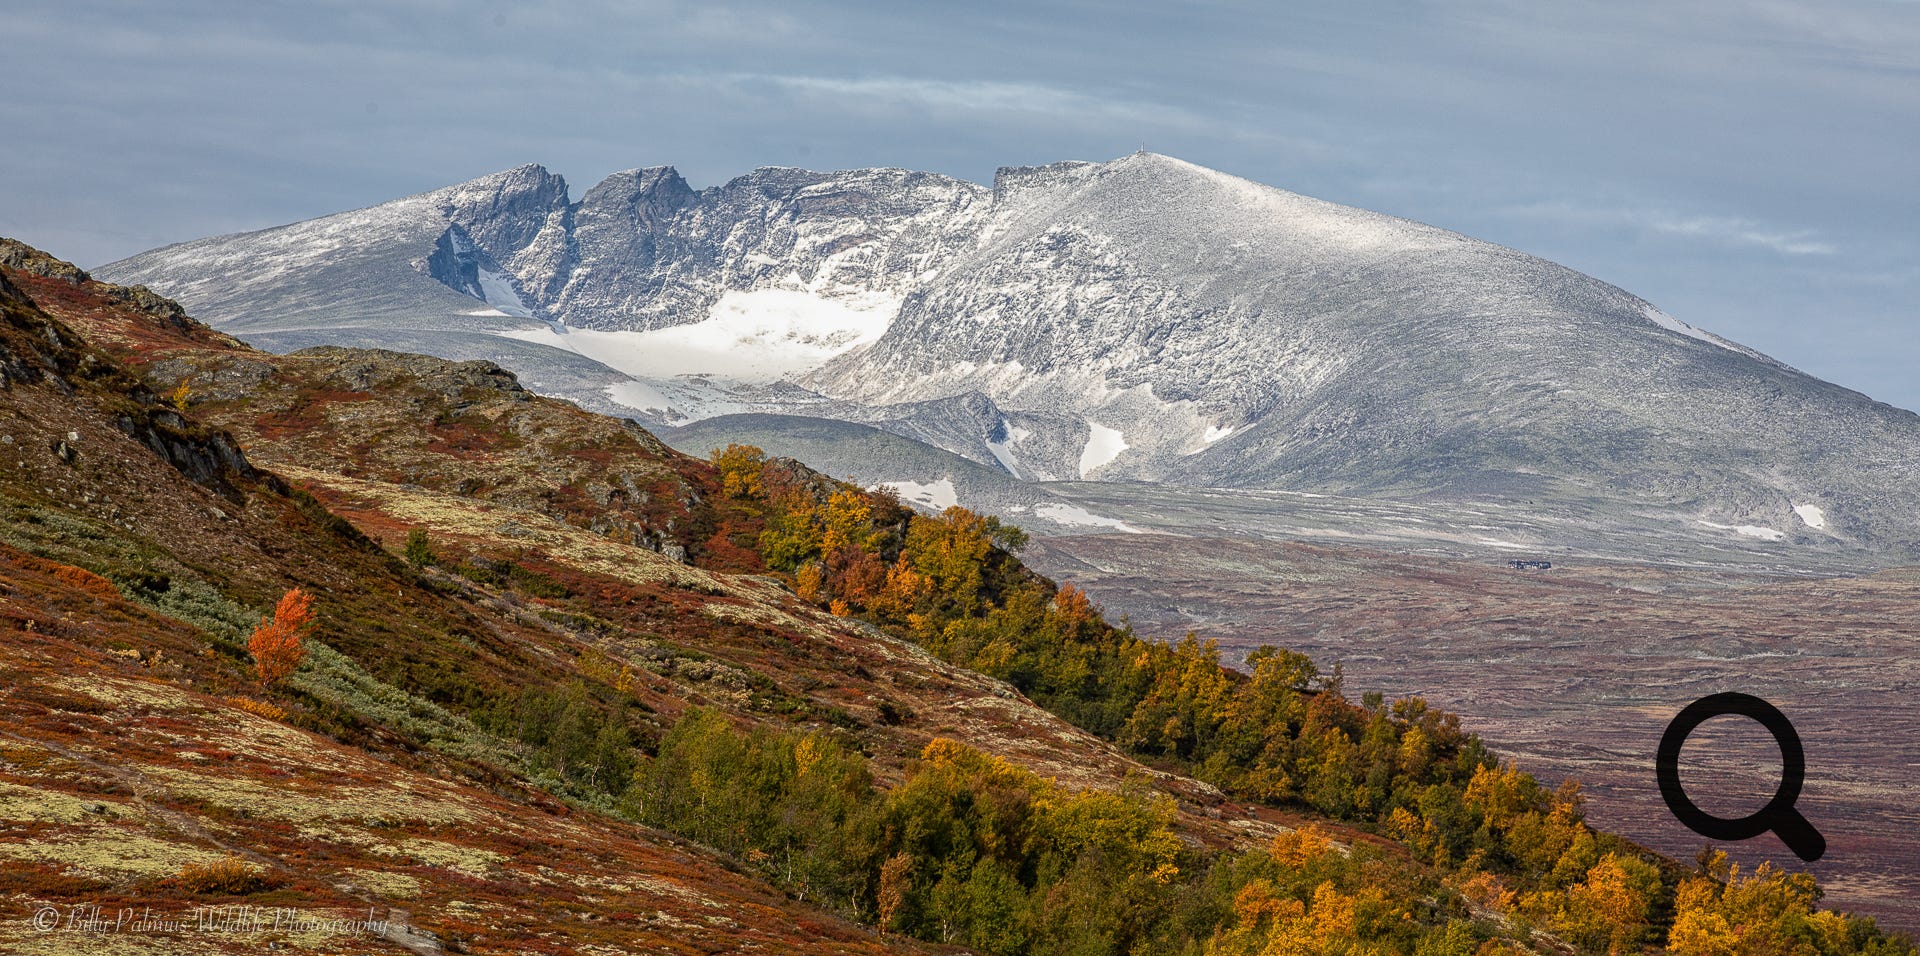 Pictures from Dovrefjell